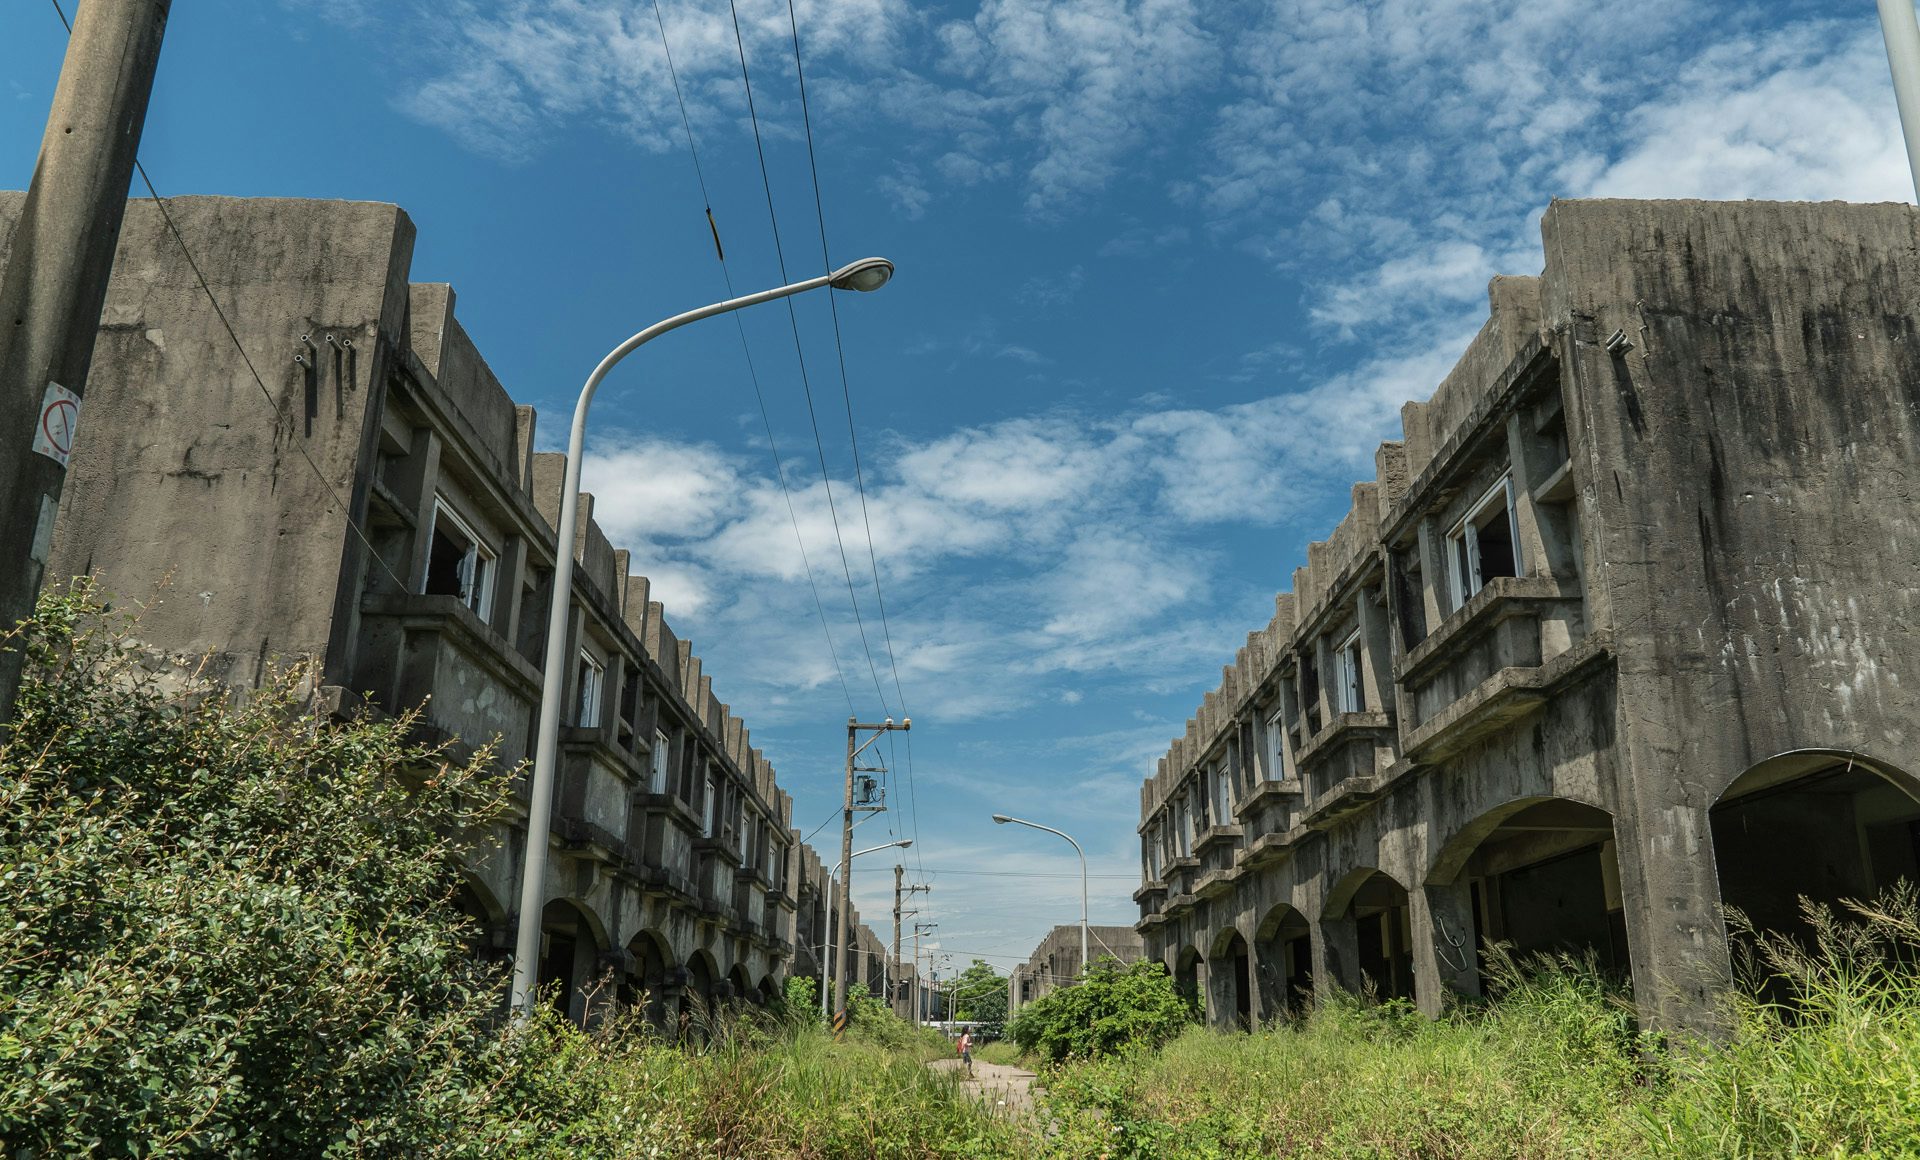 Photo from Project Urbex by Ikumi Nakamura showing two run-down buildings in an overgrown street